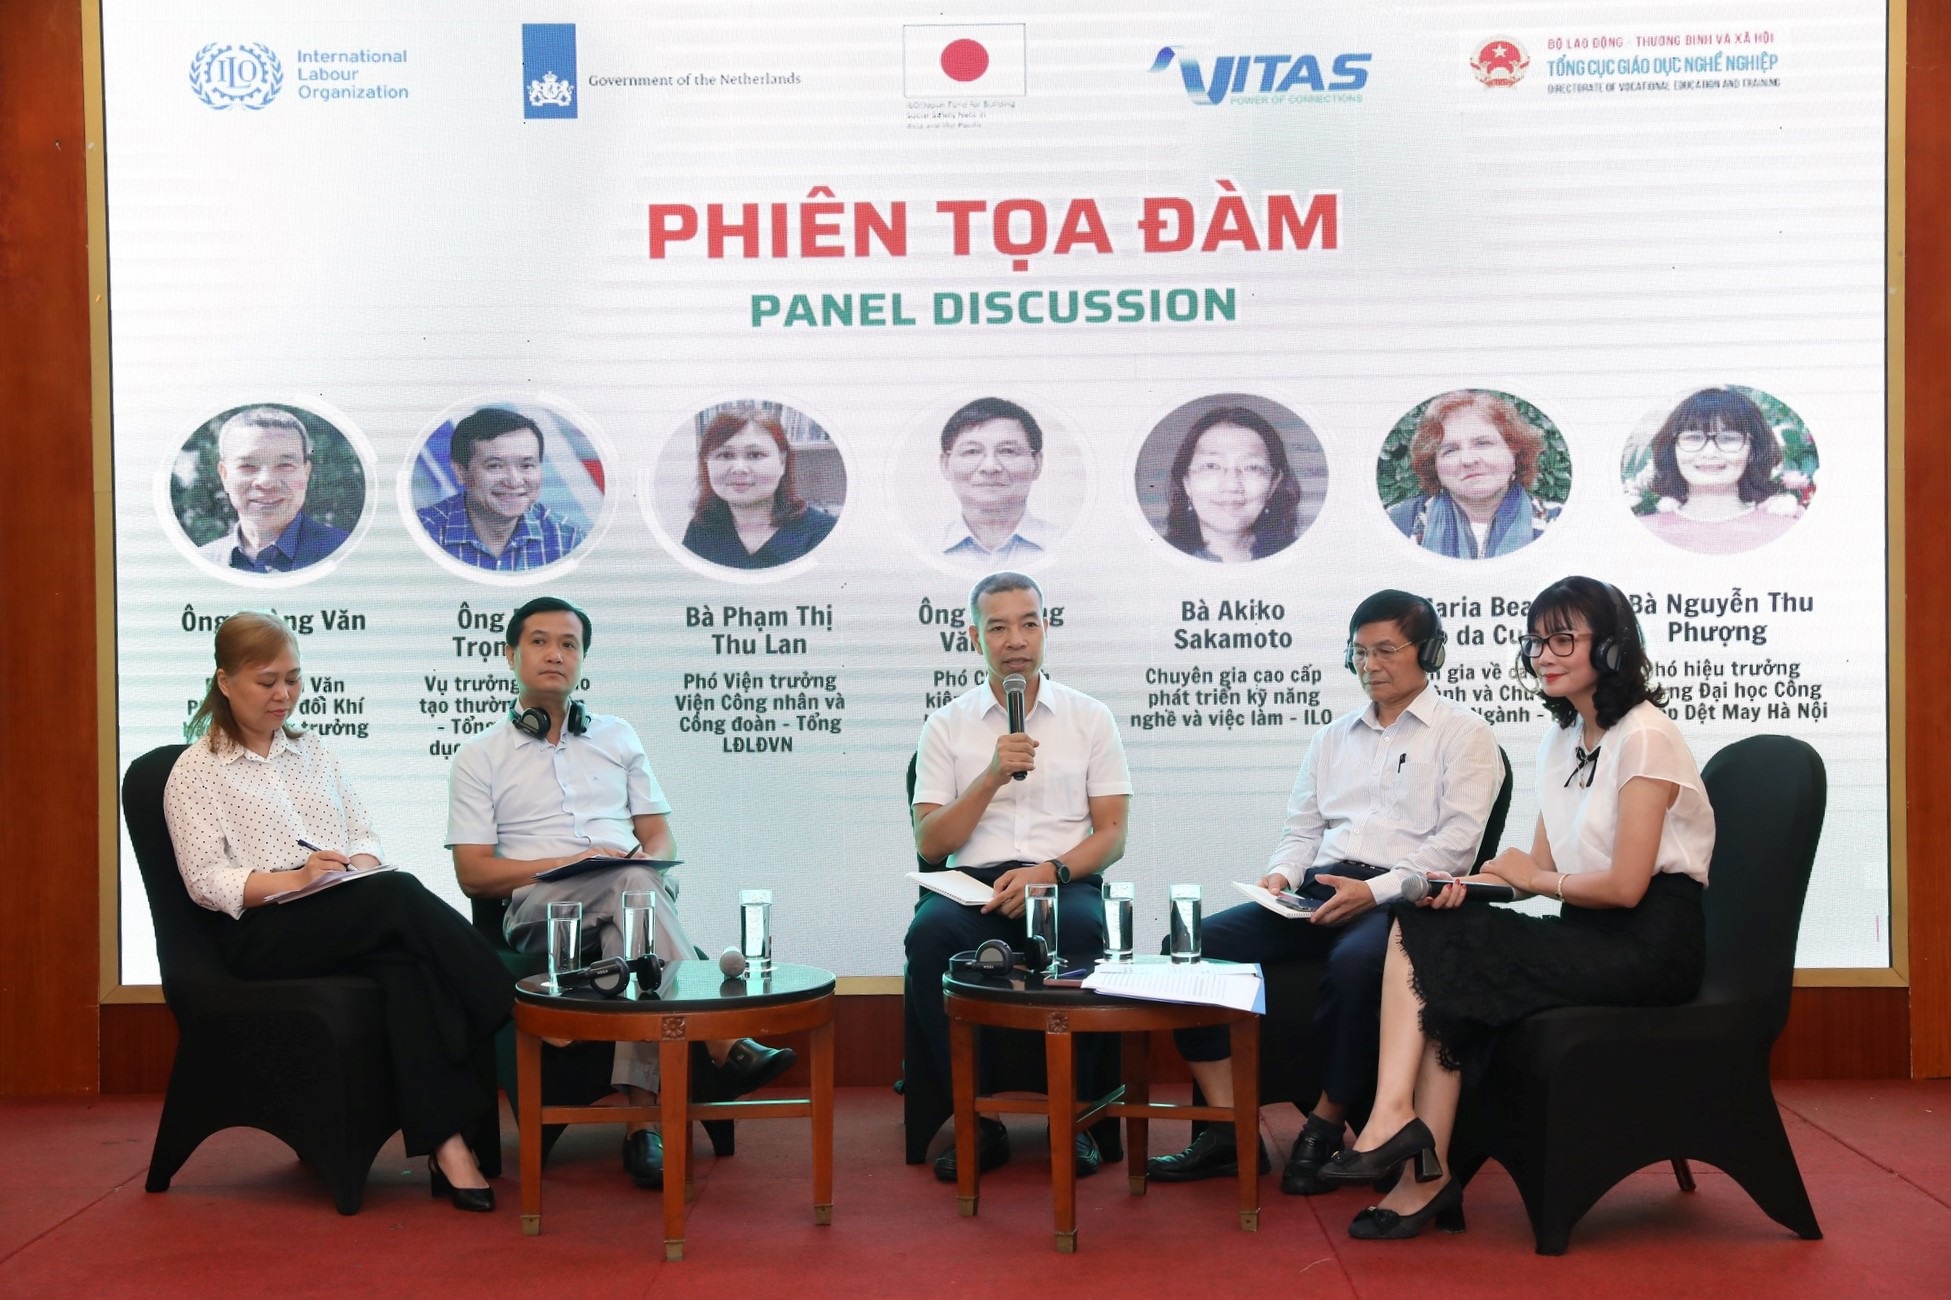 Snapshot of the panel discussion "Sharing stories from top Vietnamese aquaculture stakeholders on how to adapt the sustainable trend in the world" at the Vietnam Sustainable Aquaculture Business forum in Can Tho, 2022. Five speakers on the roundtable stage.